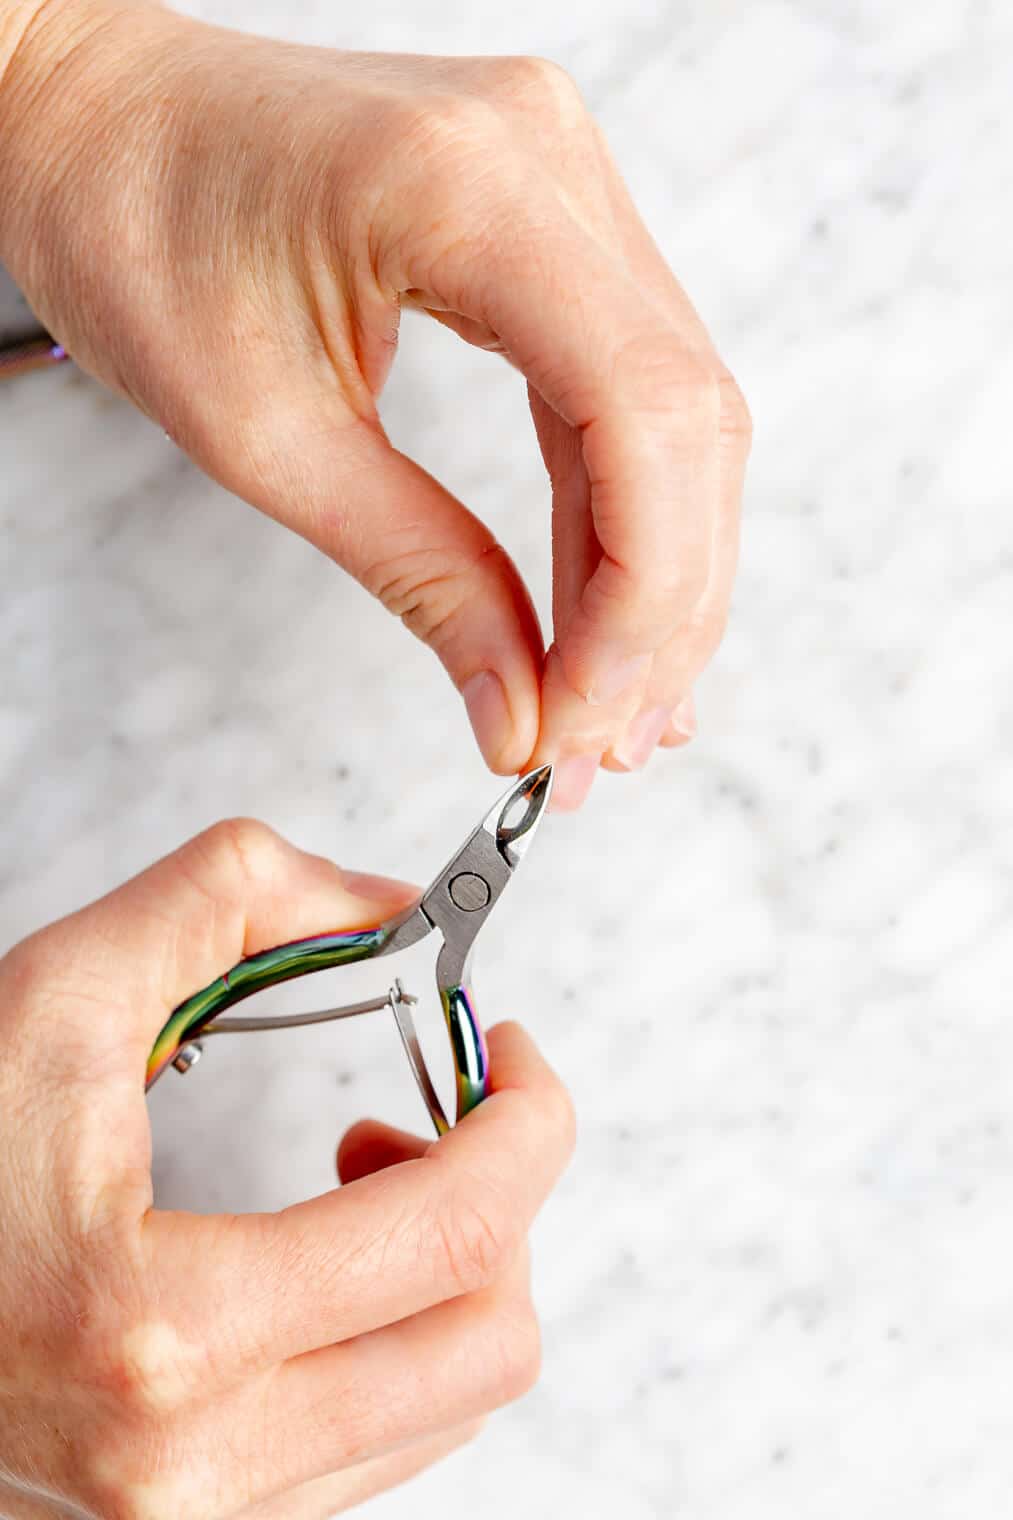 Hands trimming cuticles with cuticle trimmer.